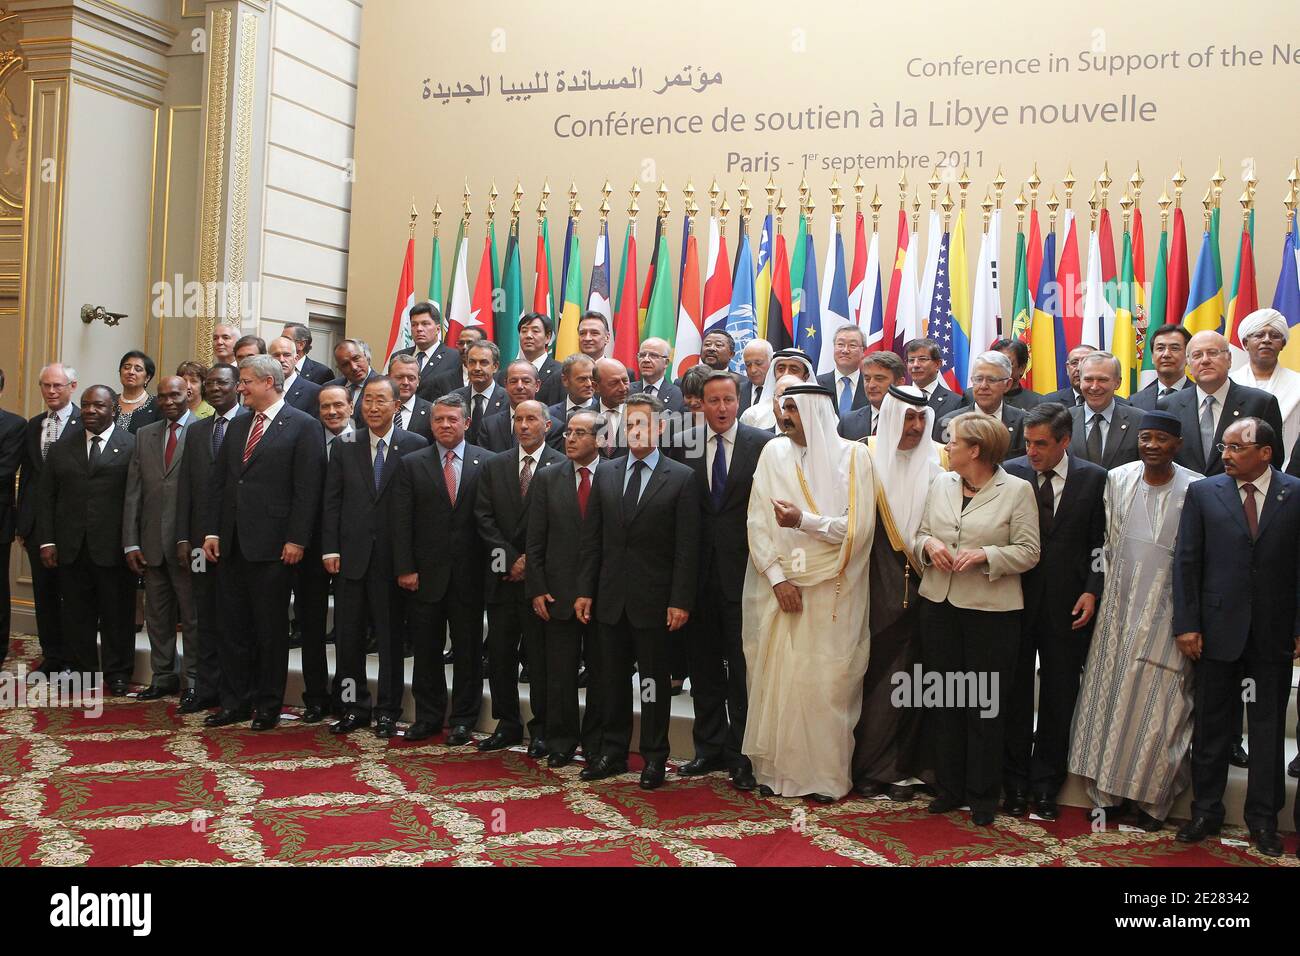 France's president Nicolas Sarkozy (C) poses with states' members and international organizations representatives as part of a summit on the post-Kadhafi era at the Elysee Palace in Paris, France on Sptember 1, 2011 (1srt row-RtoL) Kuwait's vice prime minister and foreign minister Cheikh Mohamed Sabah Al Salem Al Sabah United Kingdom's Prime Minister David Cameron; Sarkozy; number two in the rebels' NTC, Mahmud Jibril; Chairman of Libya's rebel Transitional National Council, Moustapha Abdel Jalil; King of Jordan Abdullah II; Secretary-General of the United Nations Ban Ki Moon. Photo by Thierry Stock Photo